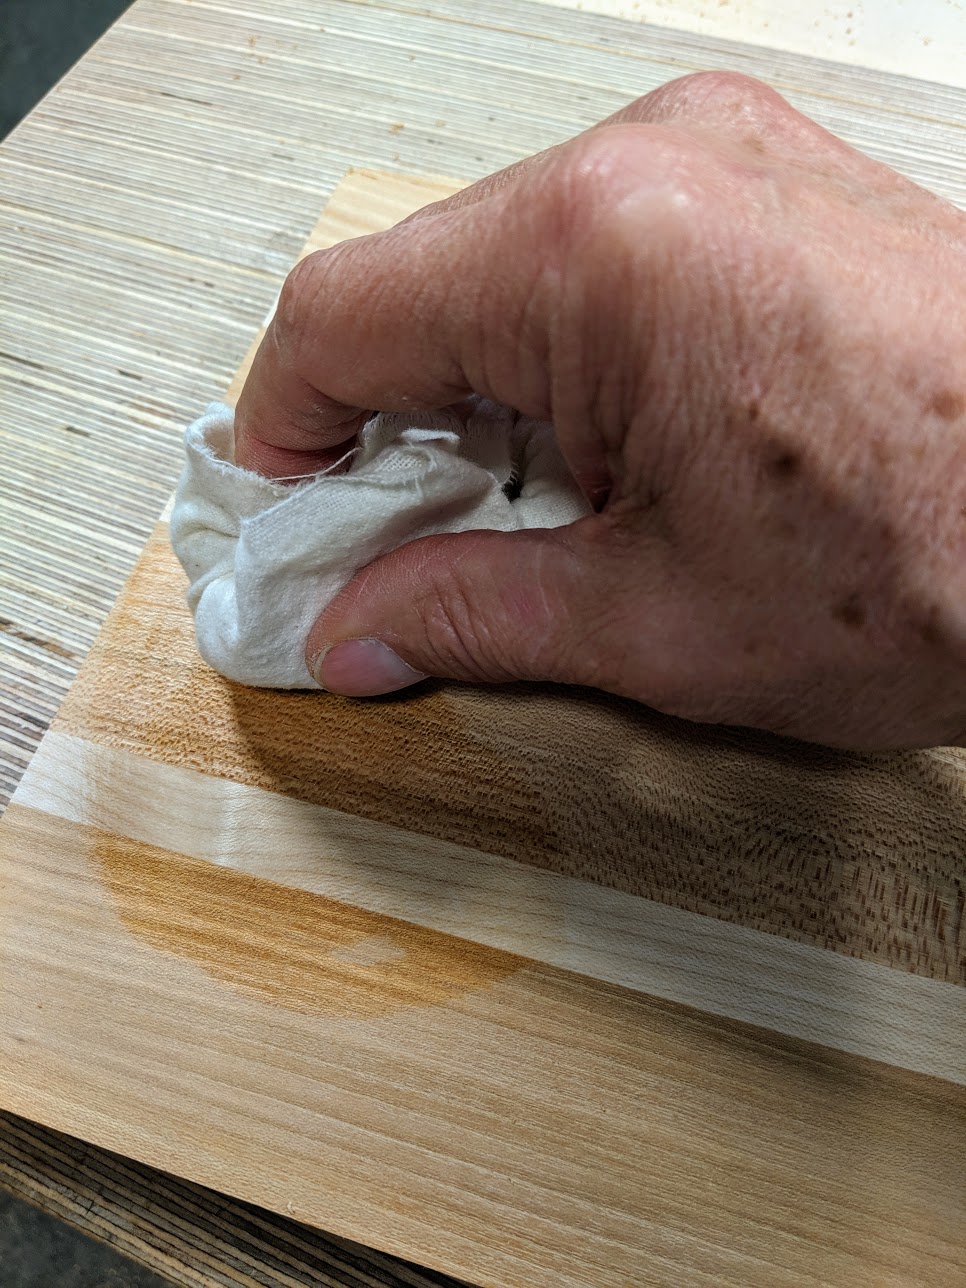 How to use Boiled Linseed Oil and Paste Wax for a Wood Finish BLO